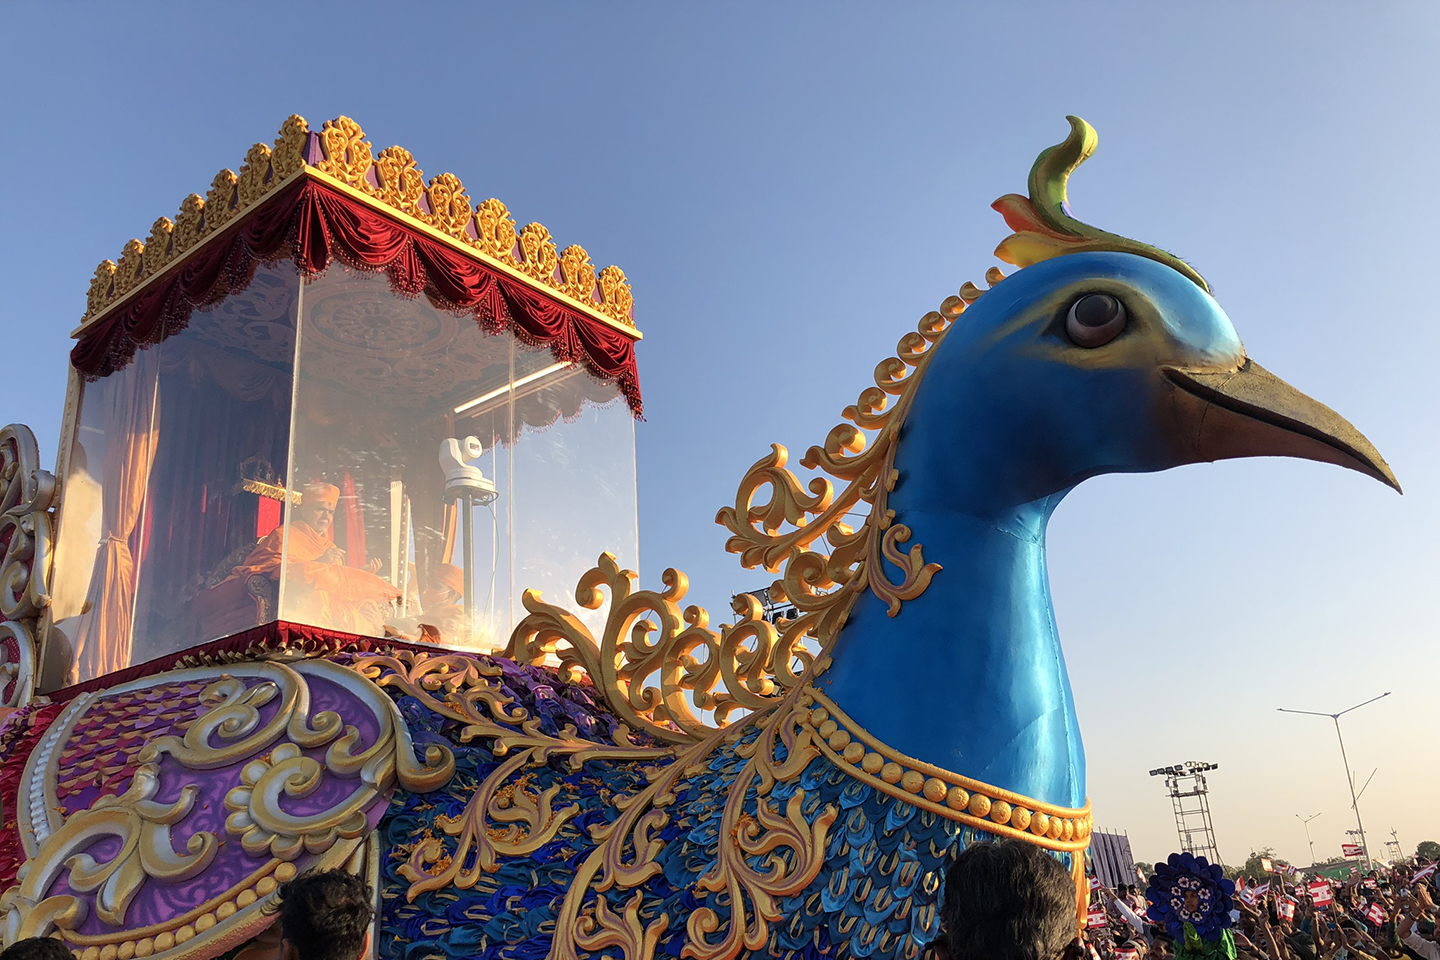 Large decorated bird acts as parade float. A man can be seen in a clear box on top of the bird's body.